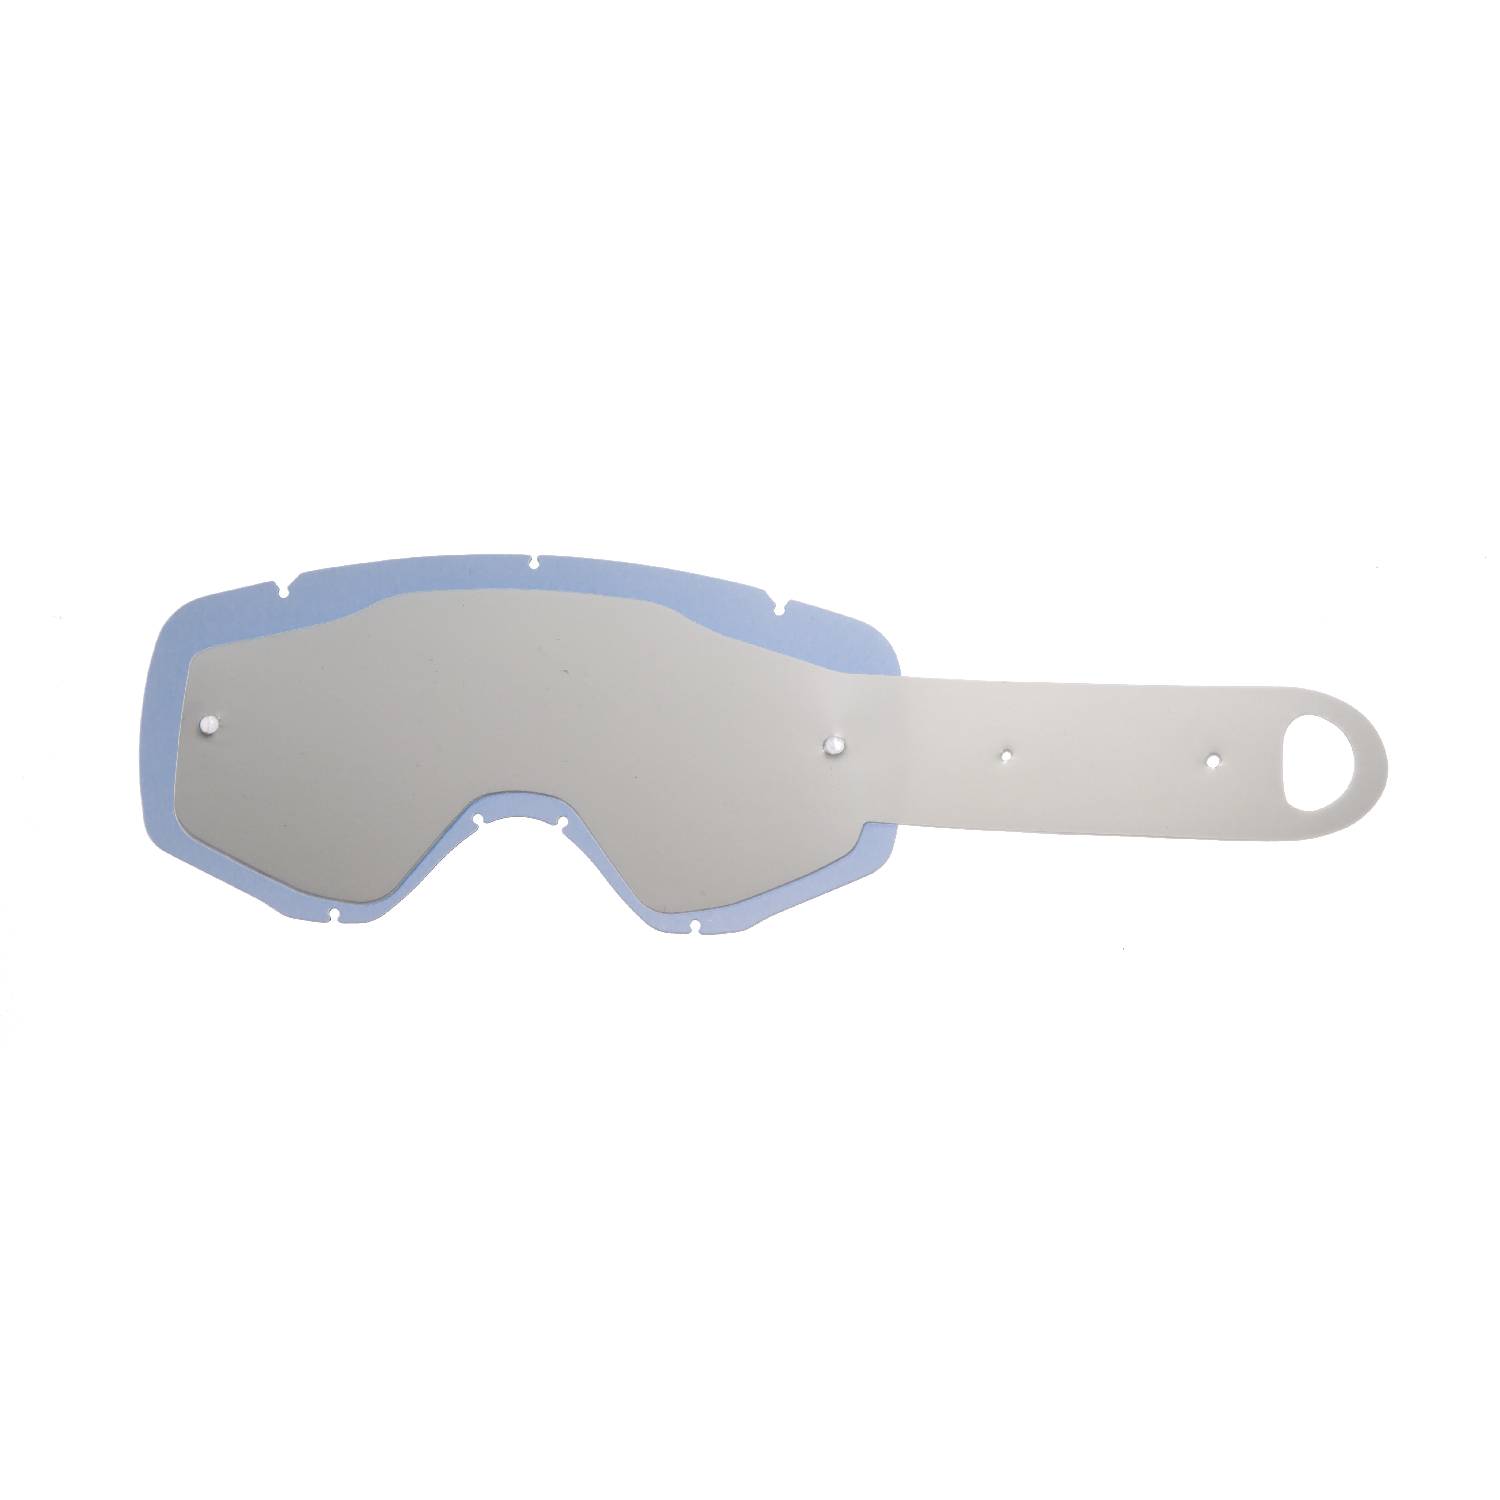 combo lenses with smokey lenses with 10 tear off compatible for Ethen Zerosei GP/ Basic / Evolution/ Mud Mask goggle